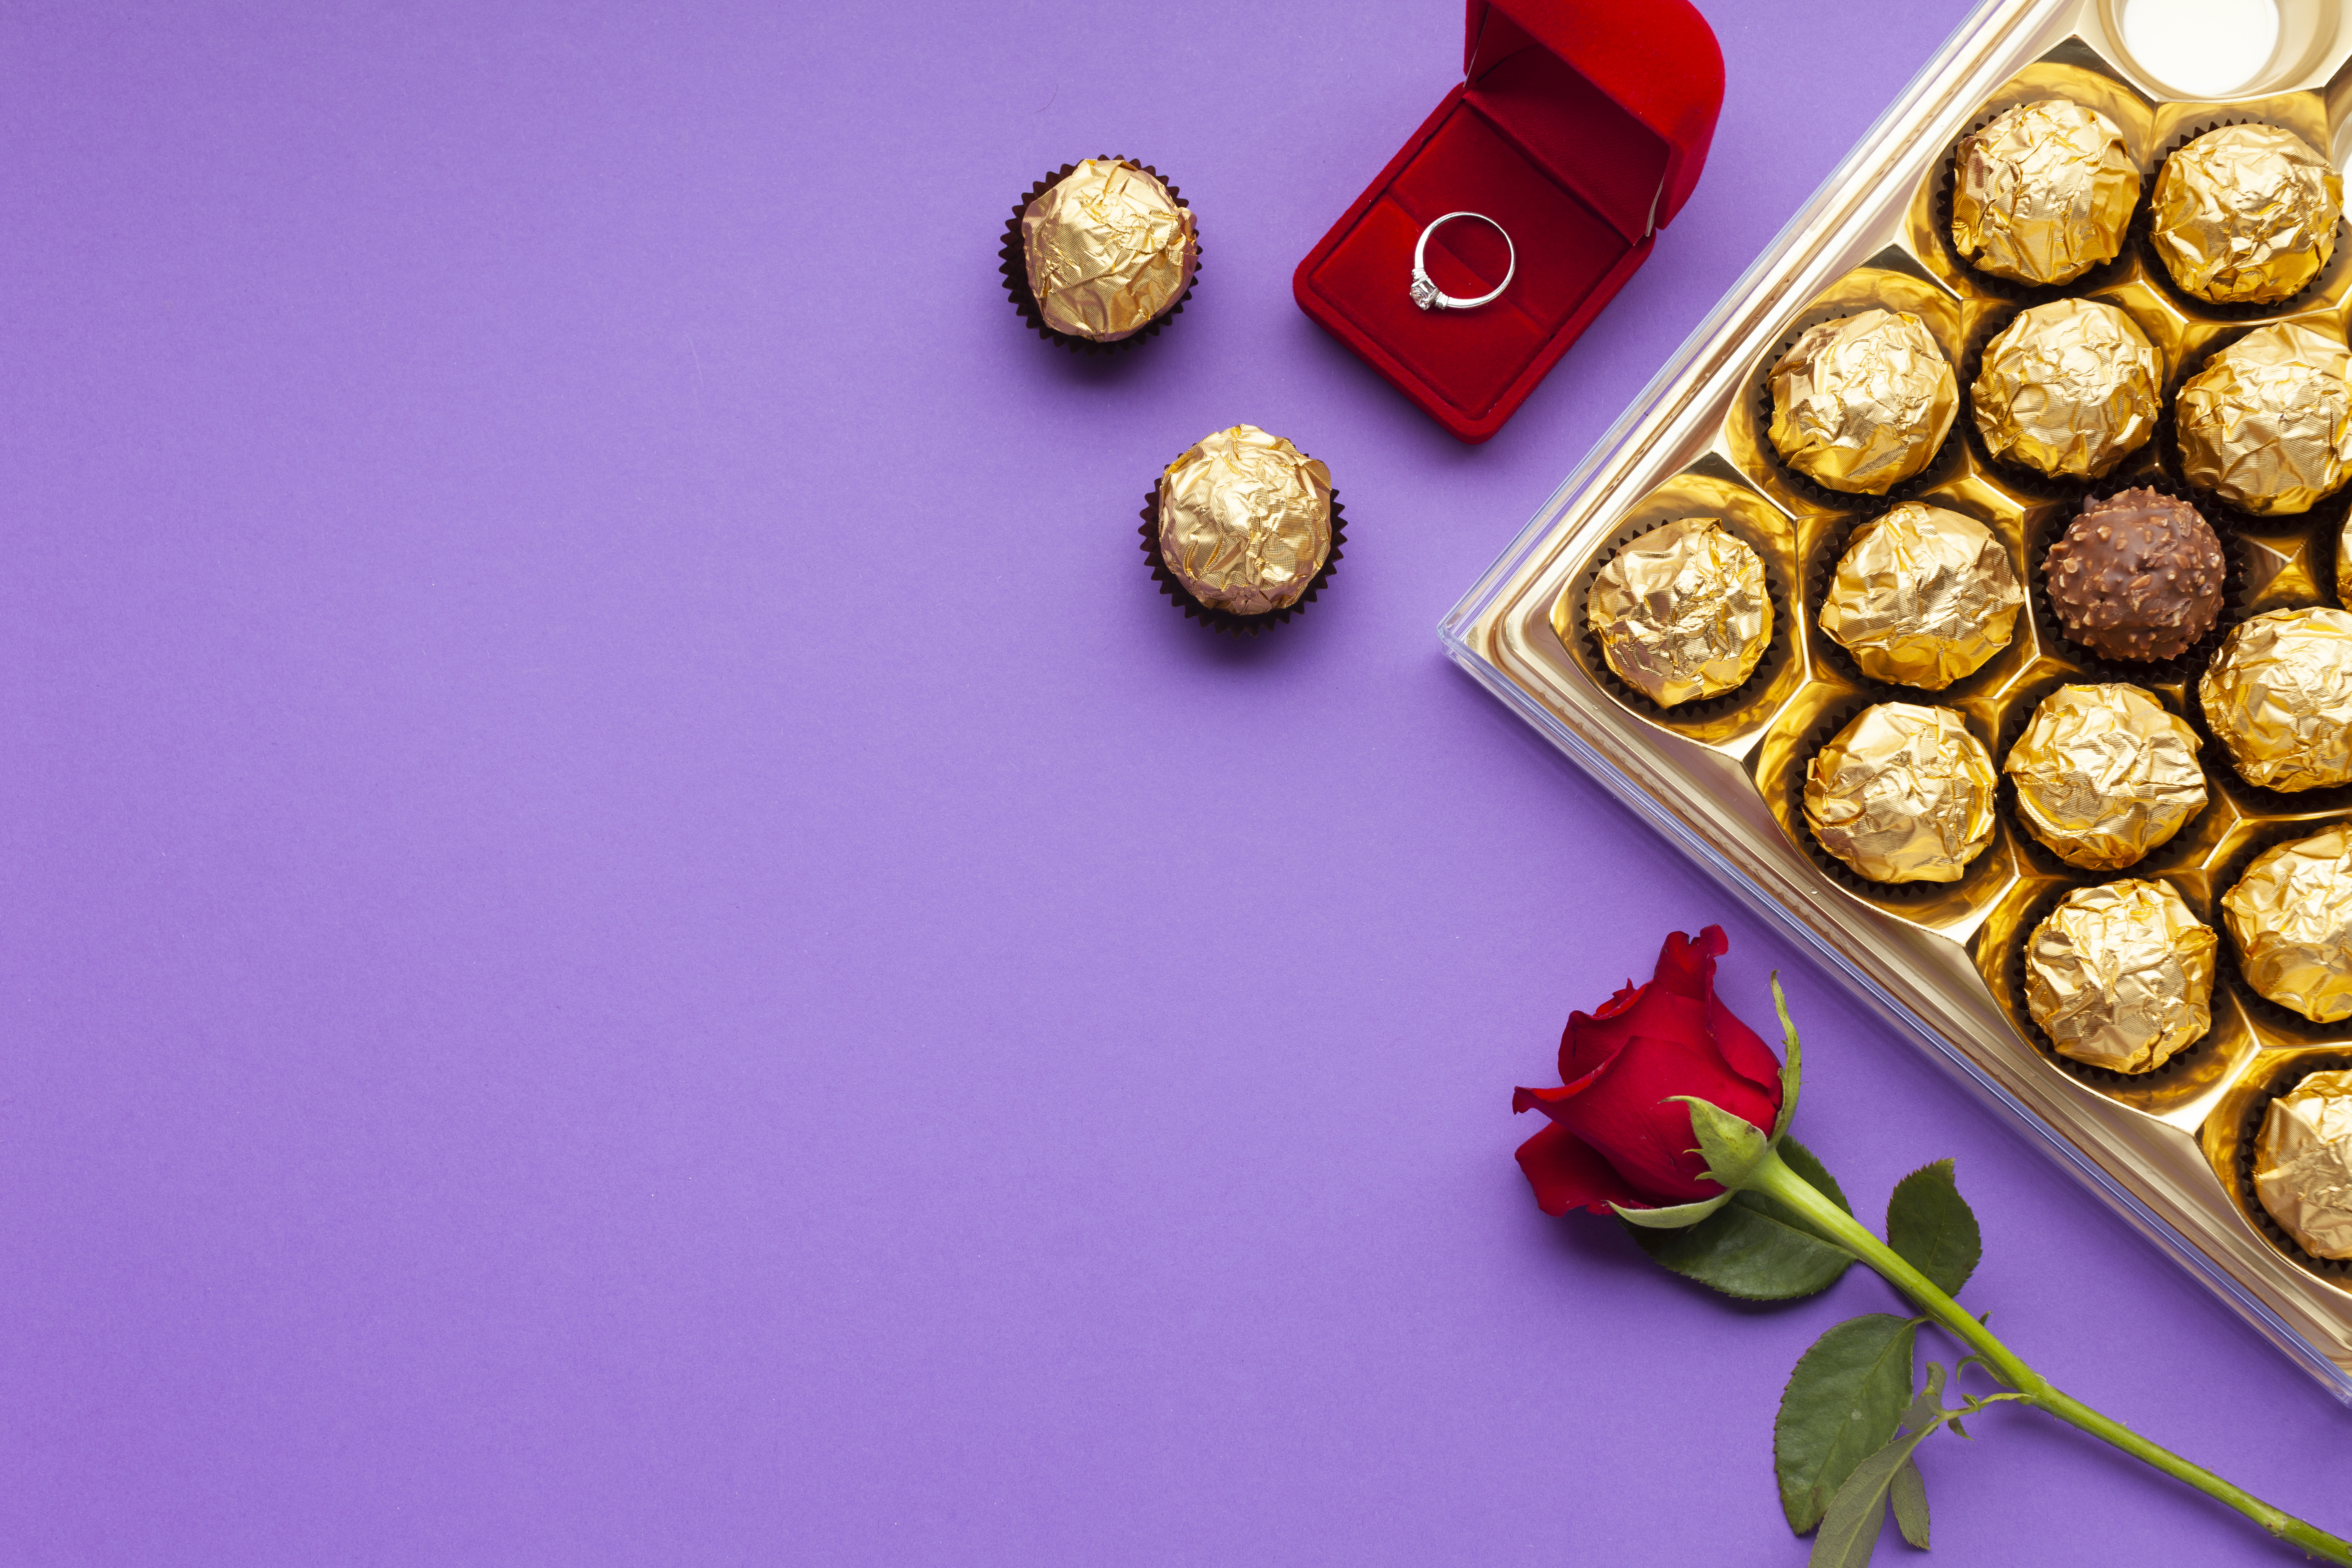 Chocolates as Valentine's Day gifts